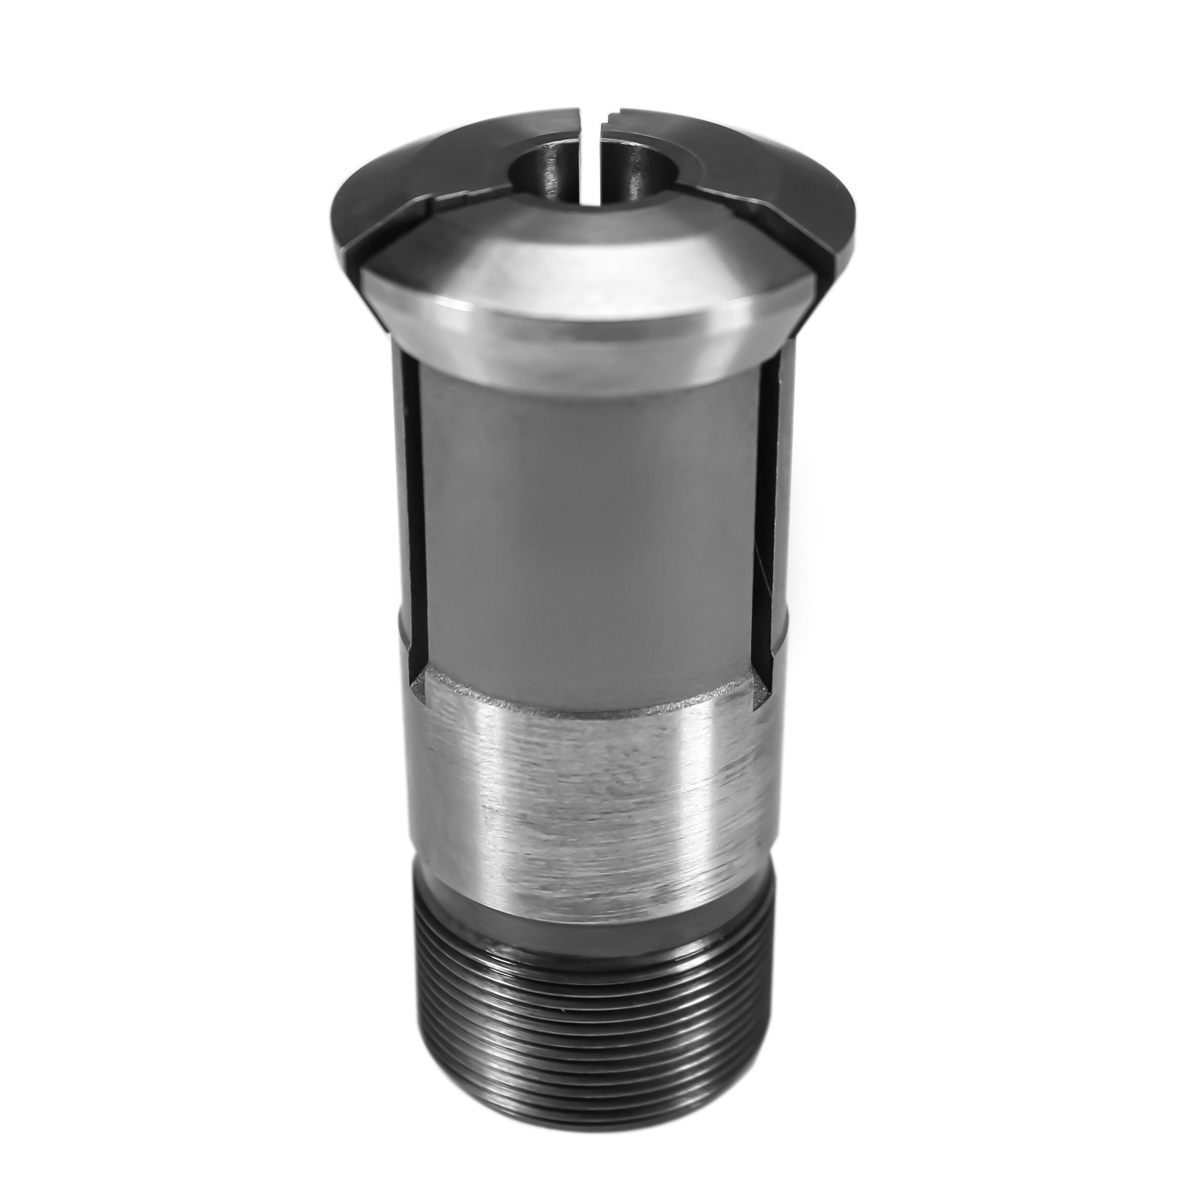 0201 Round, Carbide Lined, Swiss Guide Bushing